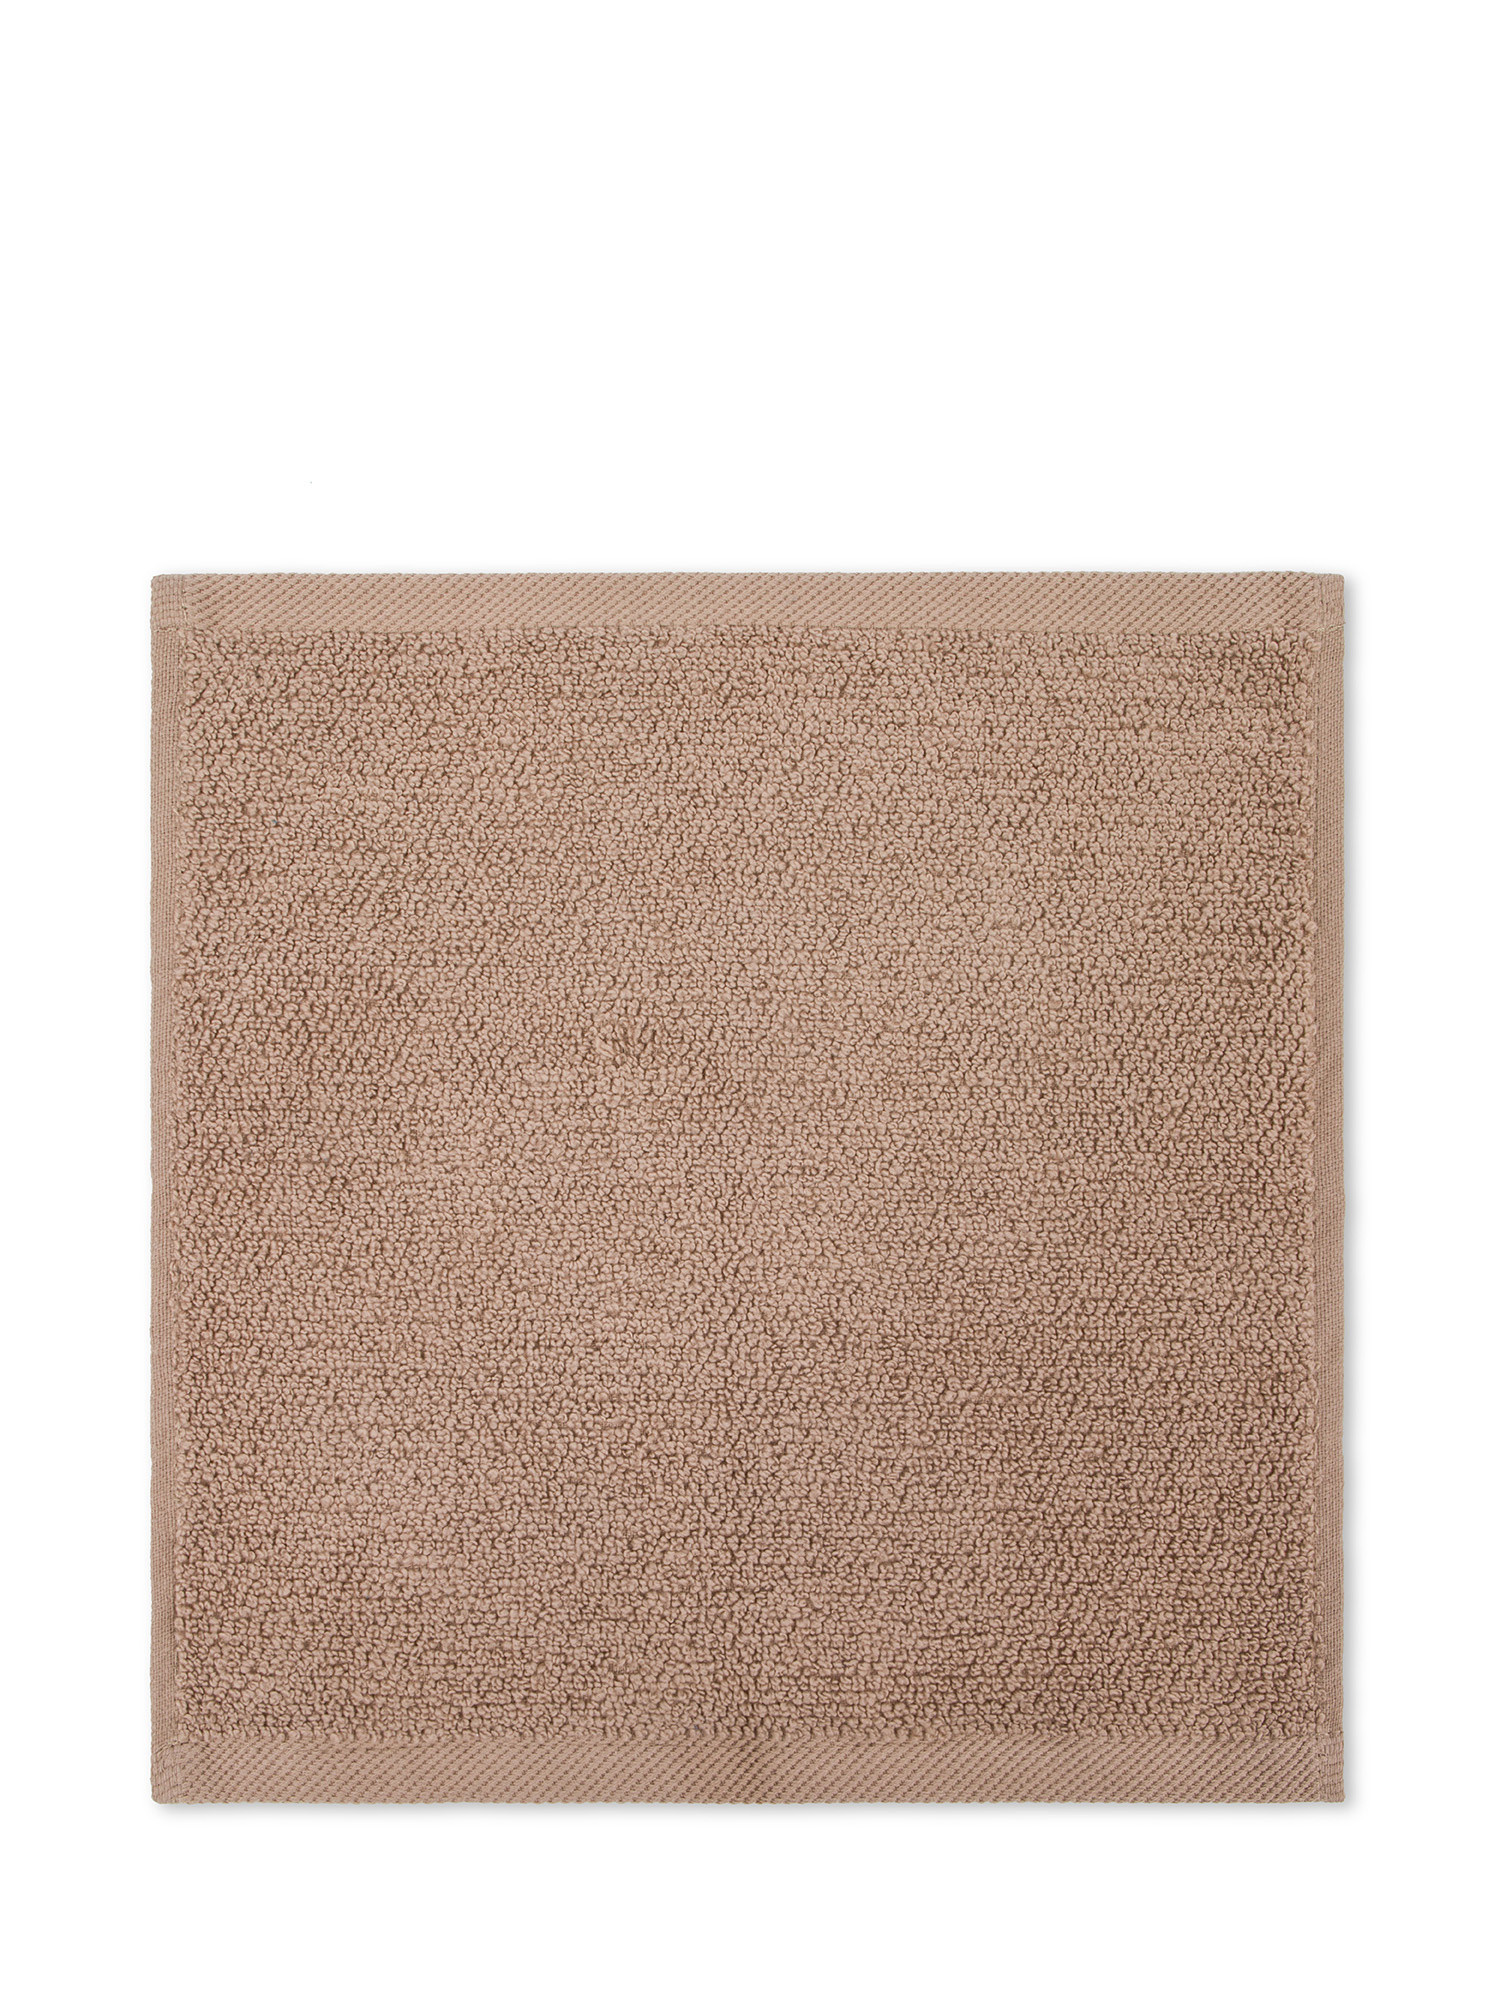 Cotton terry washcloth set of 4, TAUPE, large image number 1